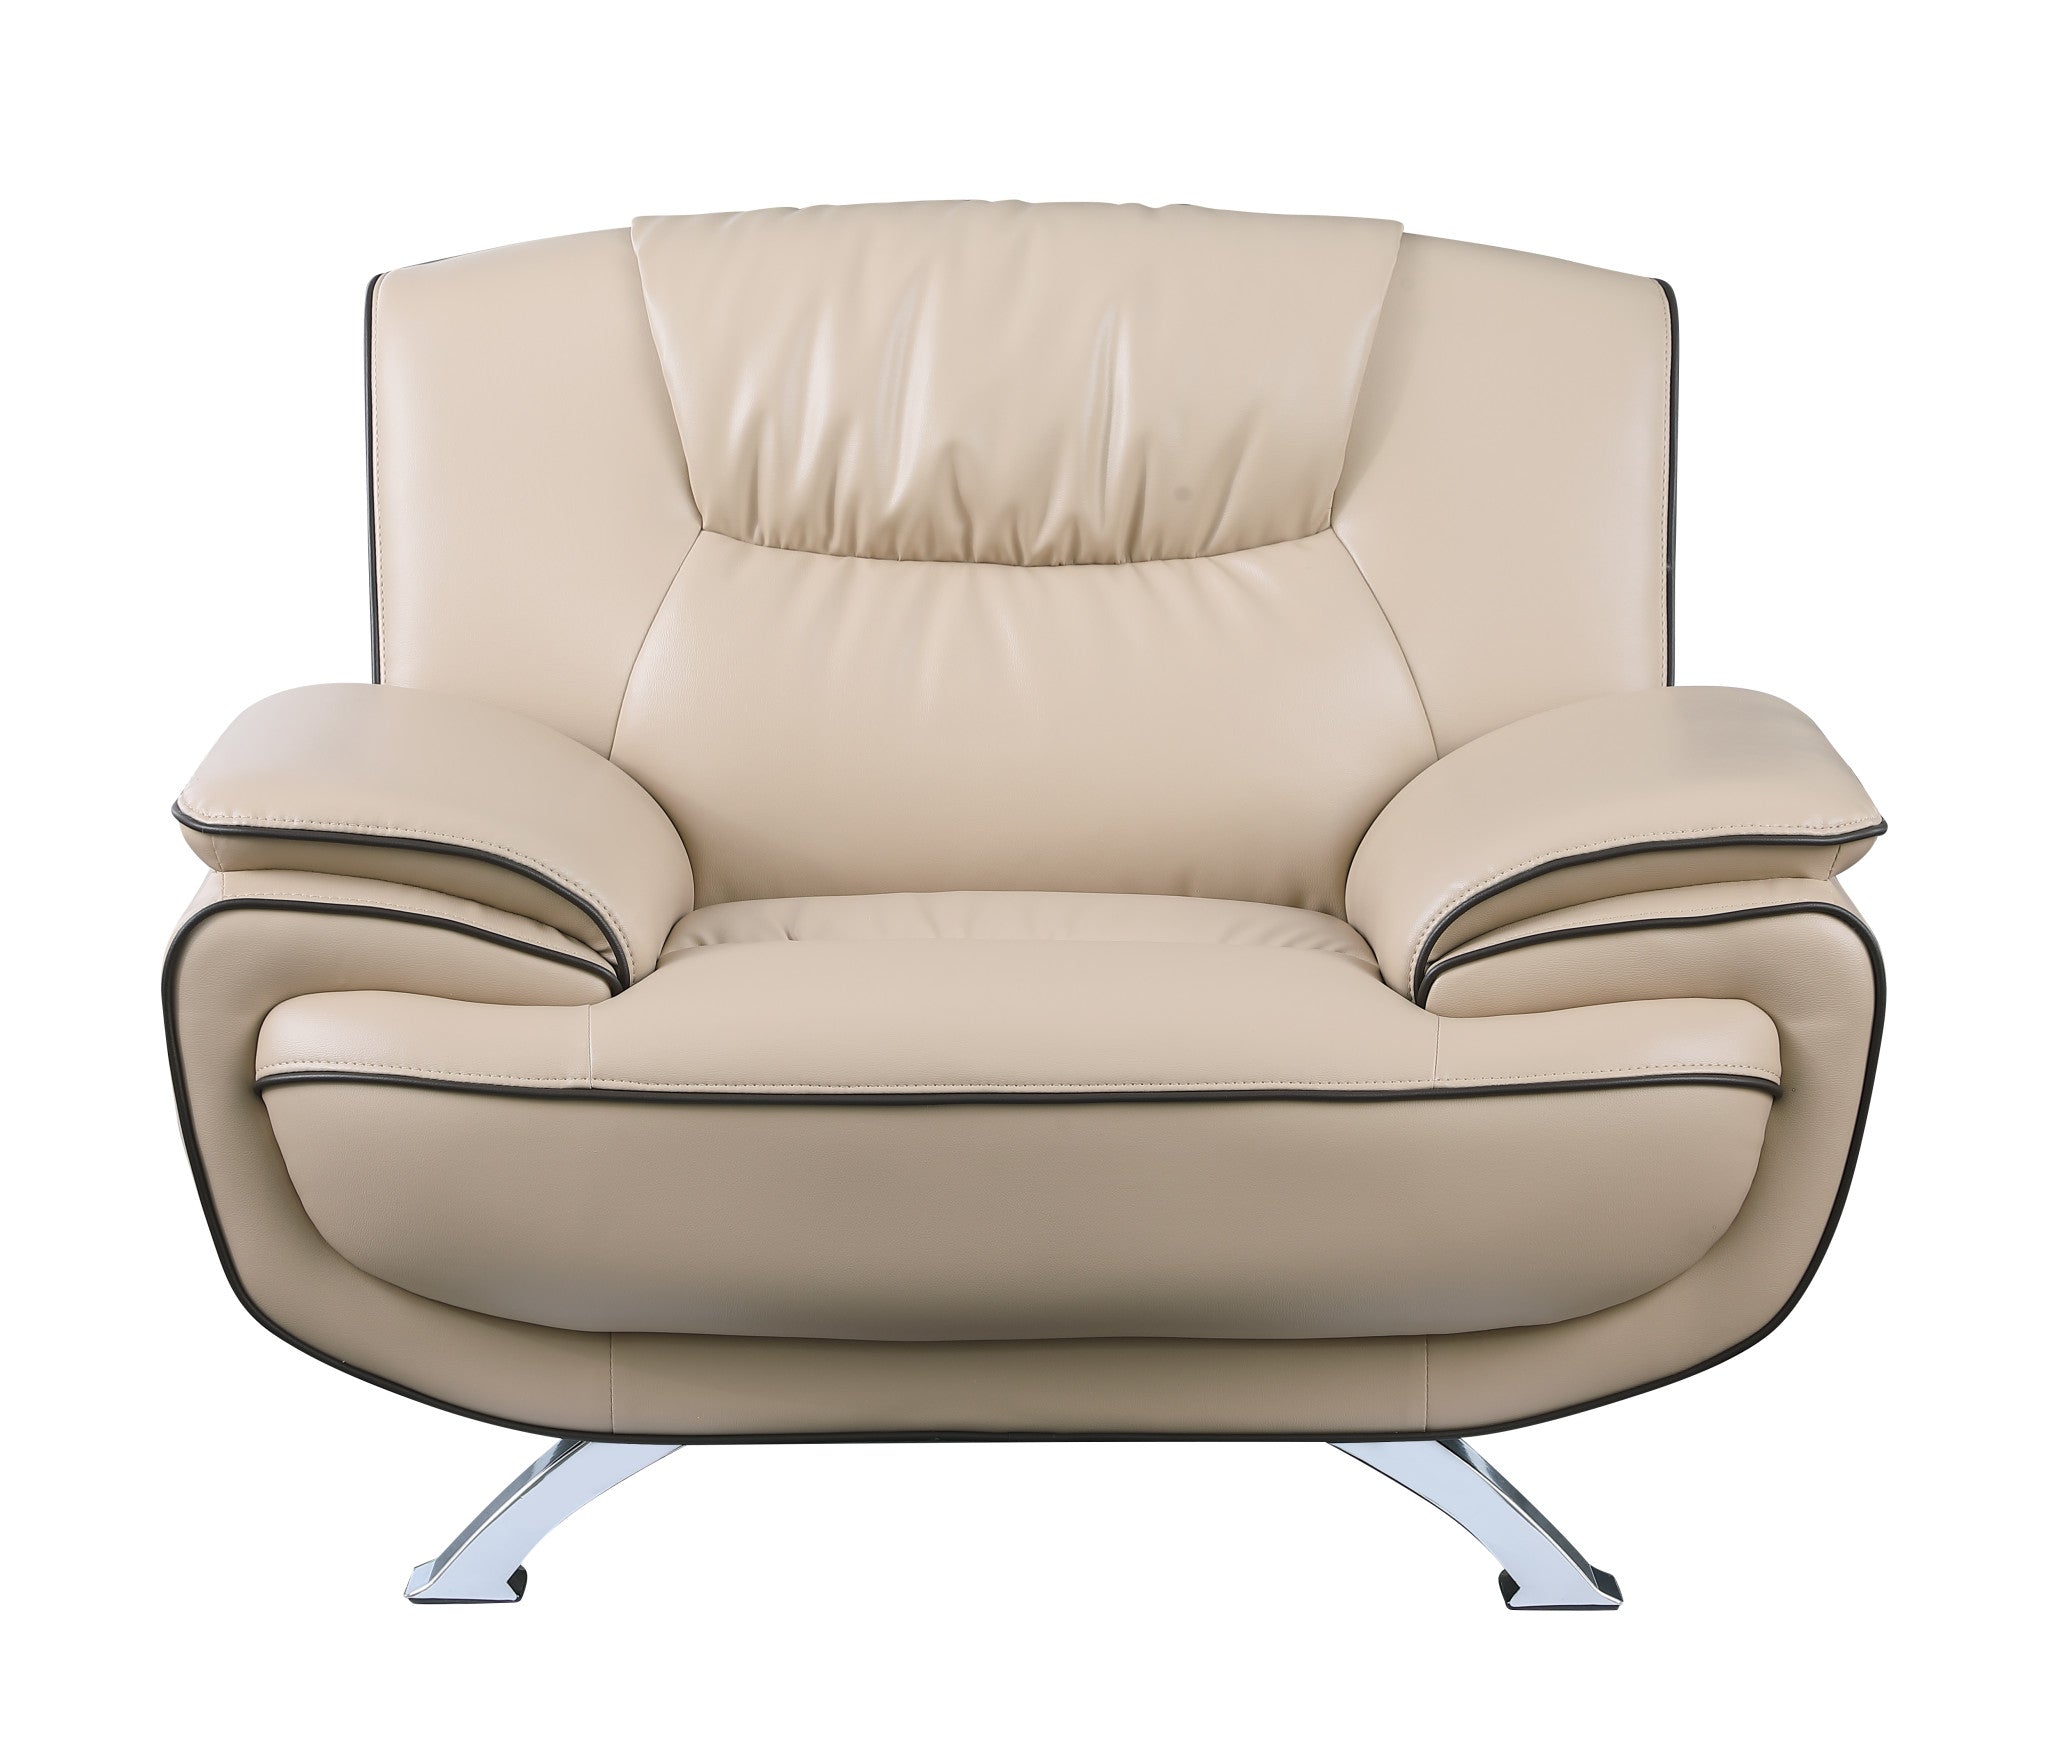 47" Beige and Silver Leather Match Arm Chair